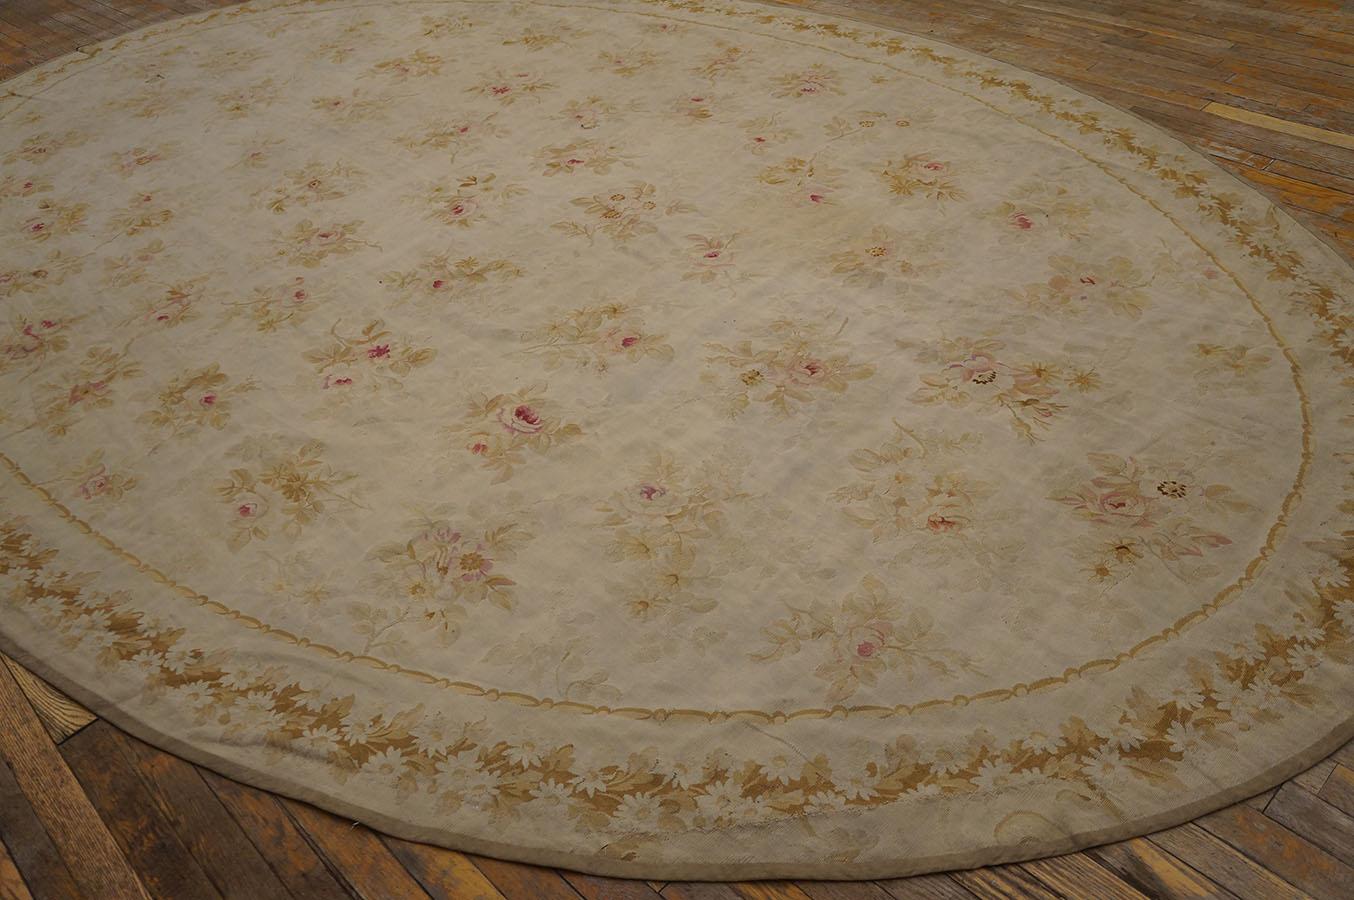 Hand-Woven Late 19th Century French Aubusson Carpet ( 8' 4'' x 13' 4'' - 255 x 405 cm )  For Sale